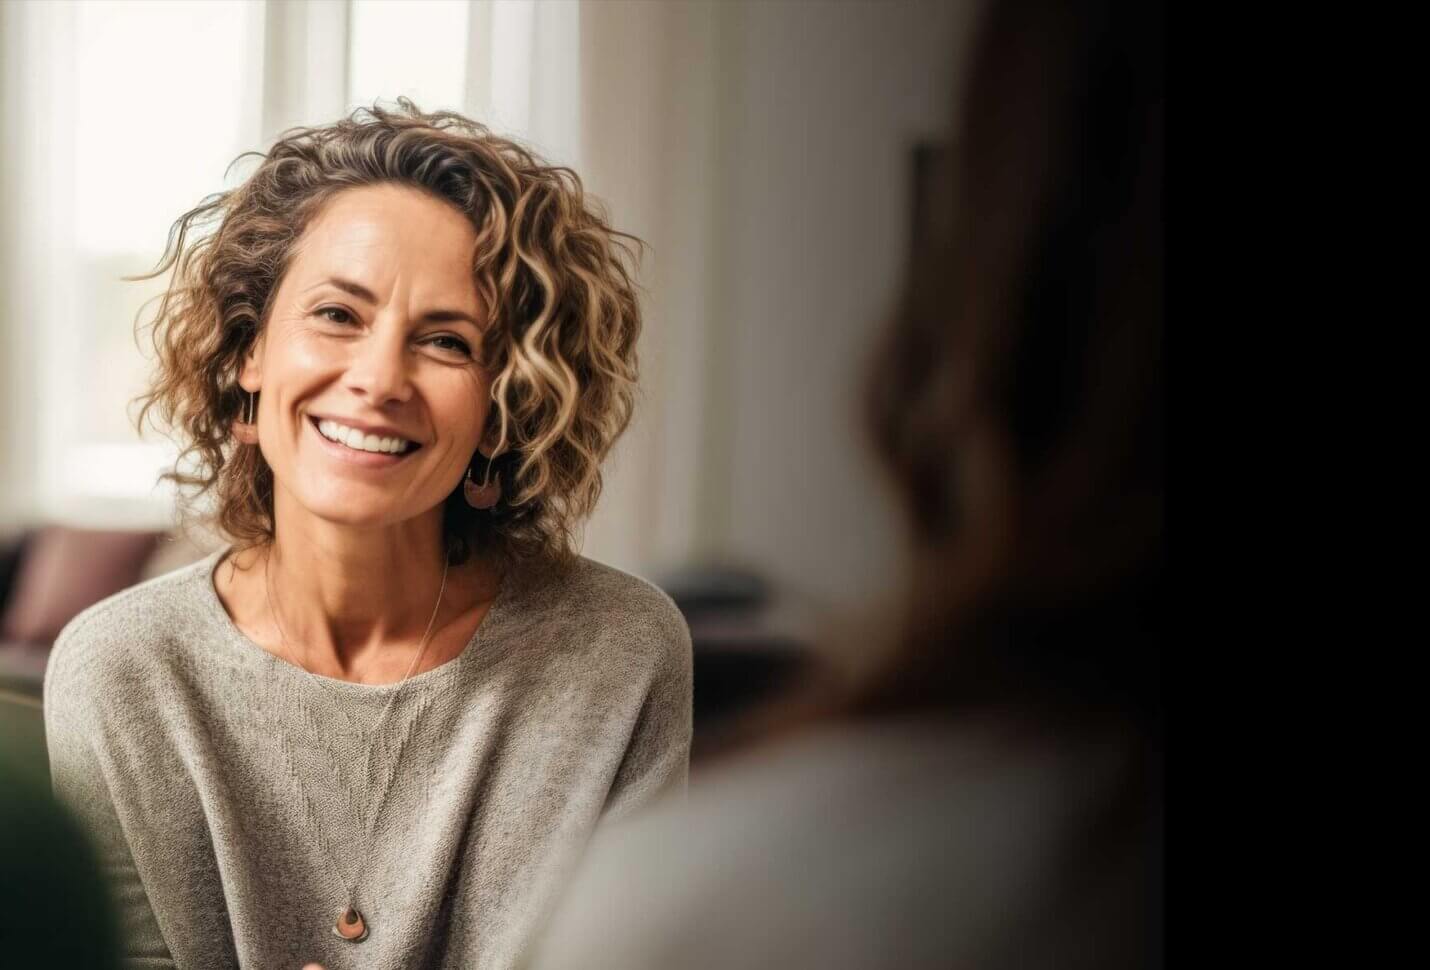 Smiling woman sitting in a therapy session